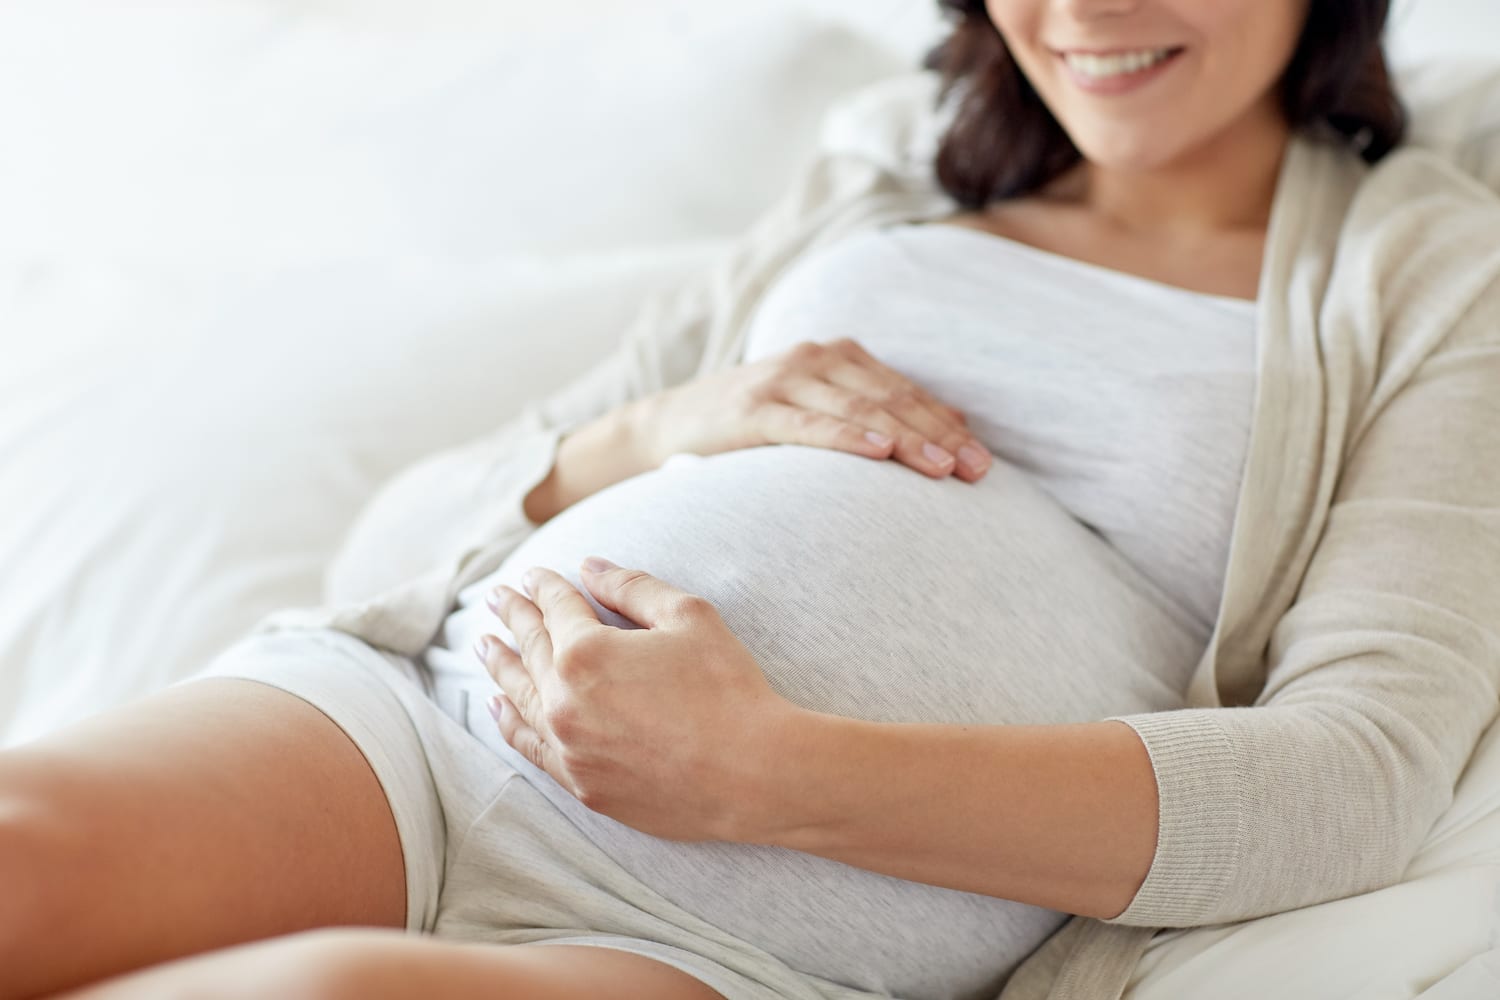 17 Must-Have Items That Will Make Your Pregnancy Much More Comfortable.